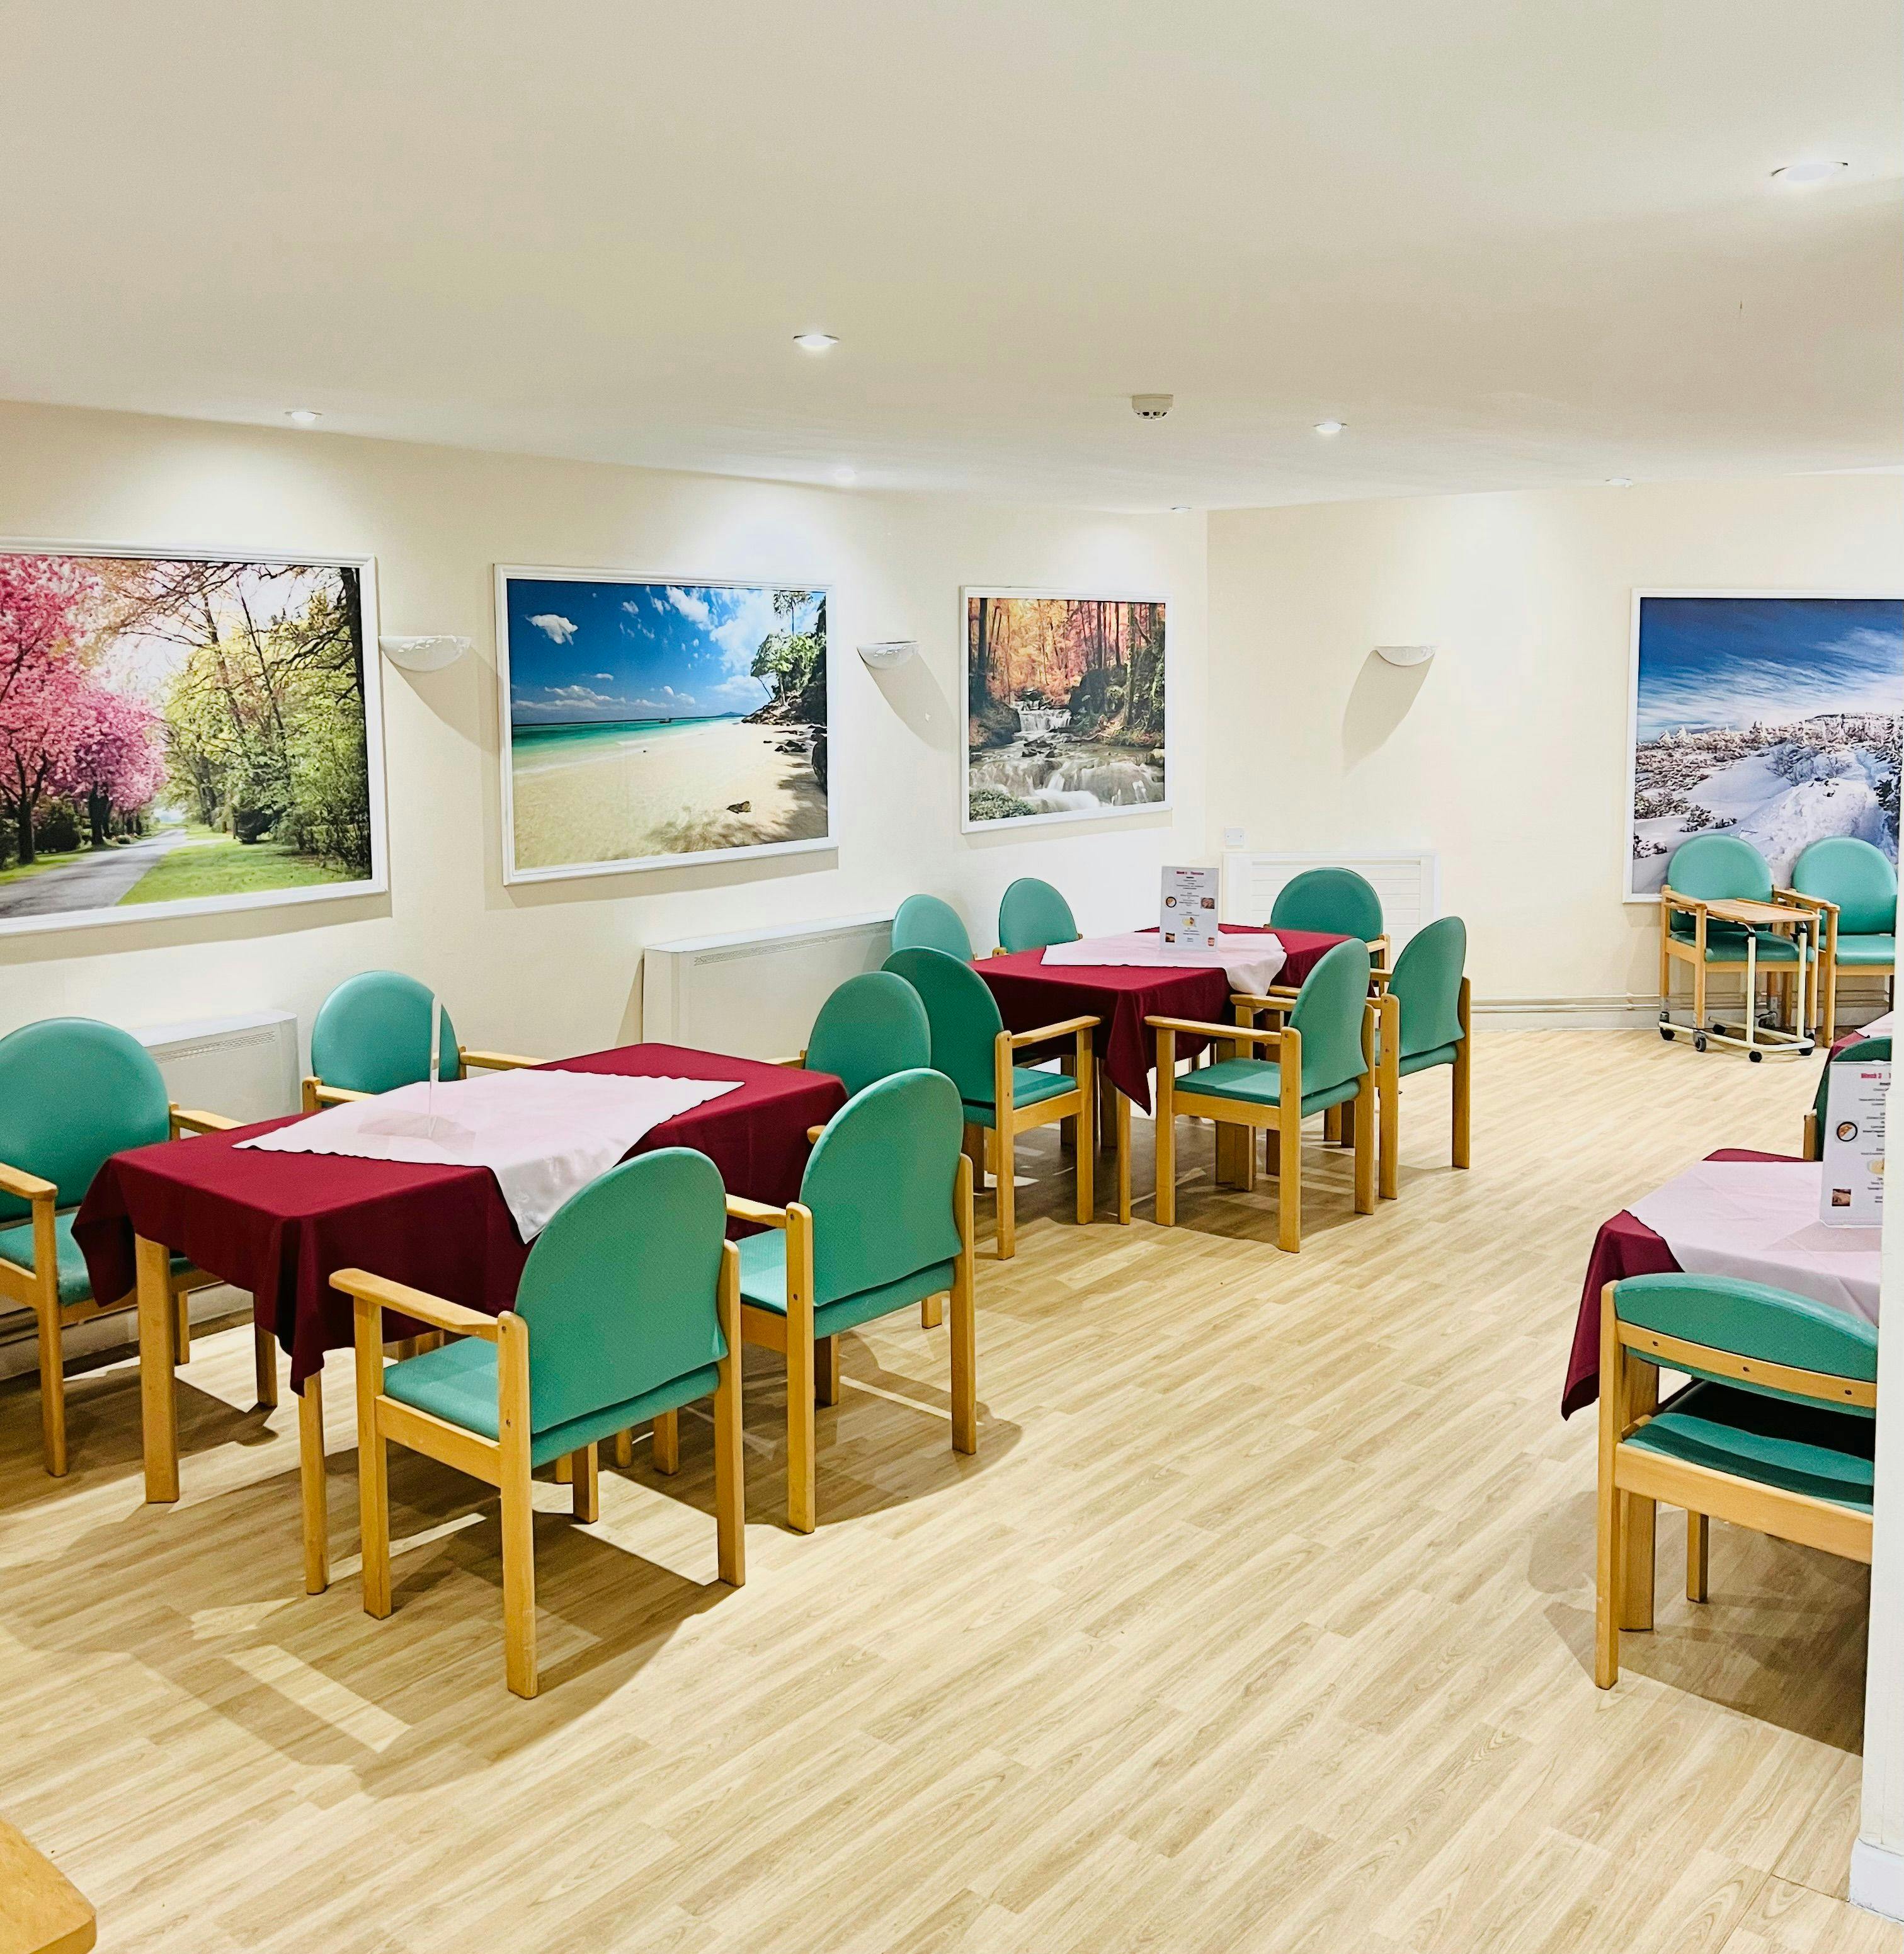 Coate Water Care - Woodstock care home 2